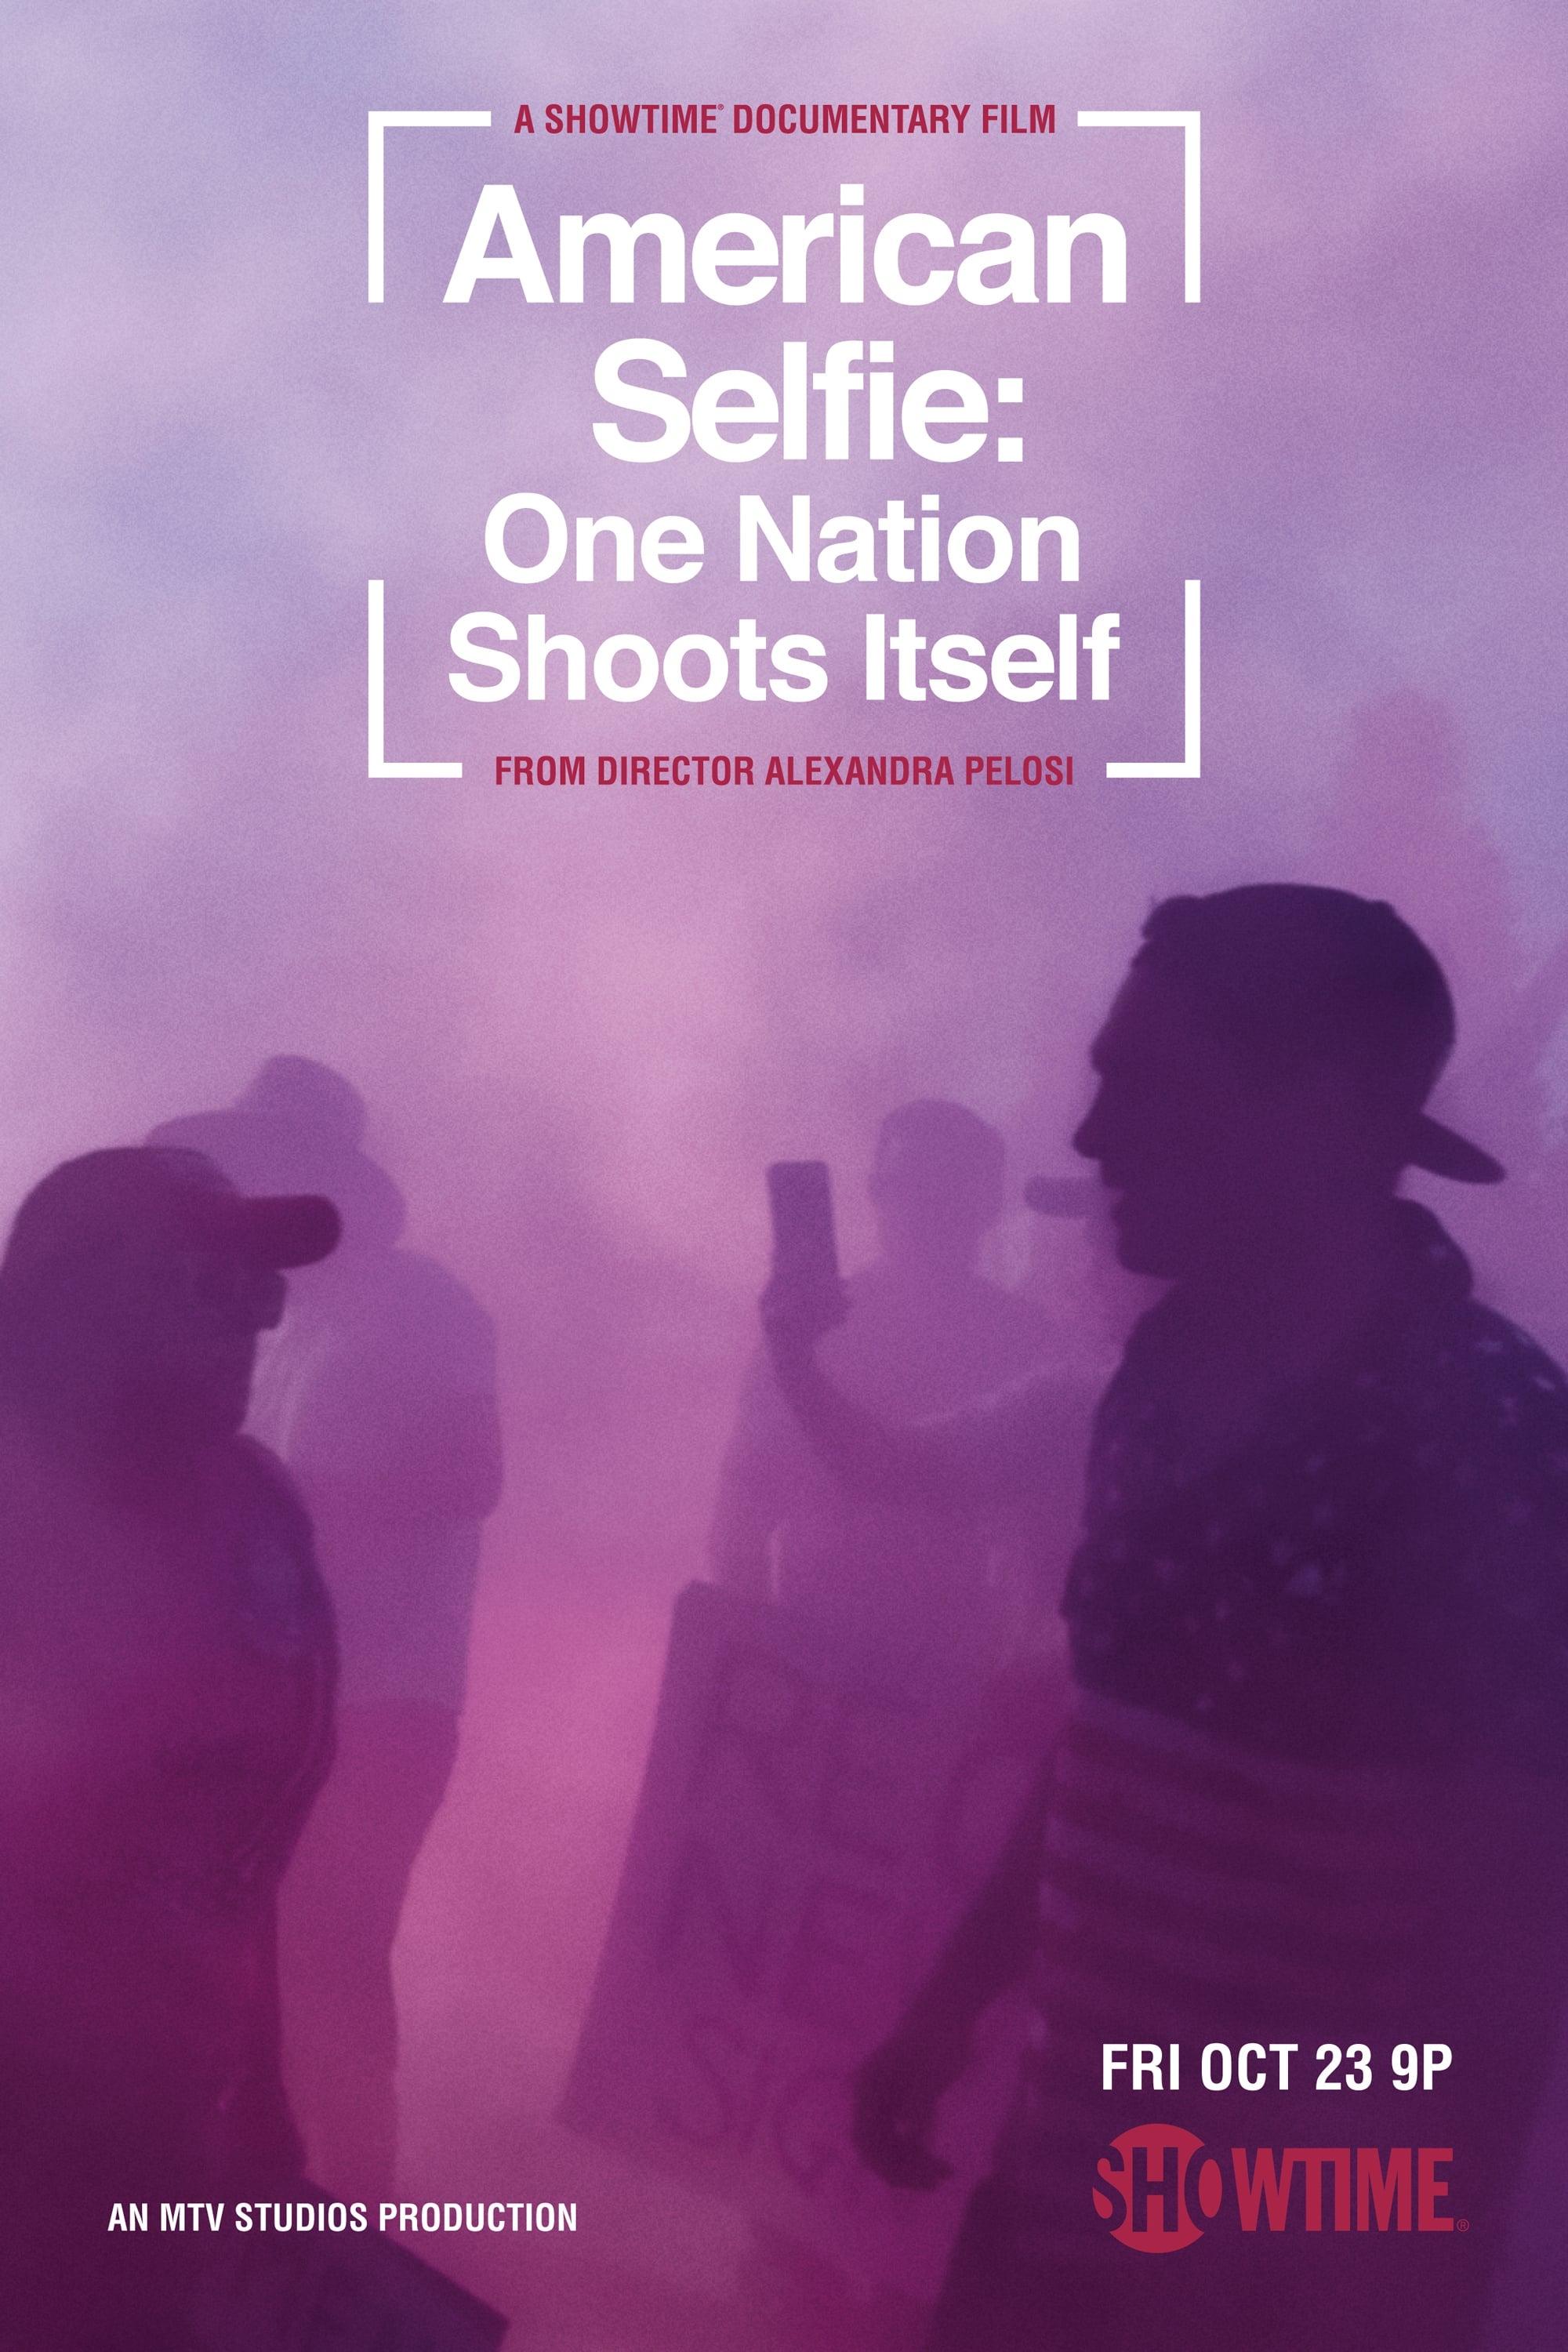 American Selfie: One Nation Shoots Itself poster